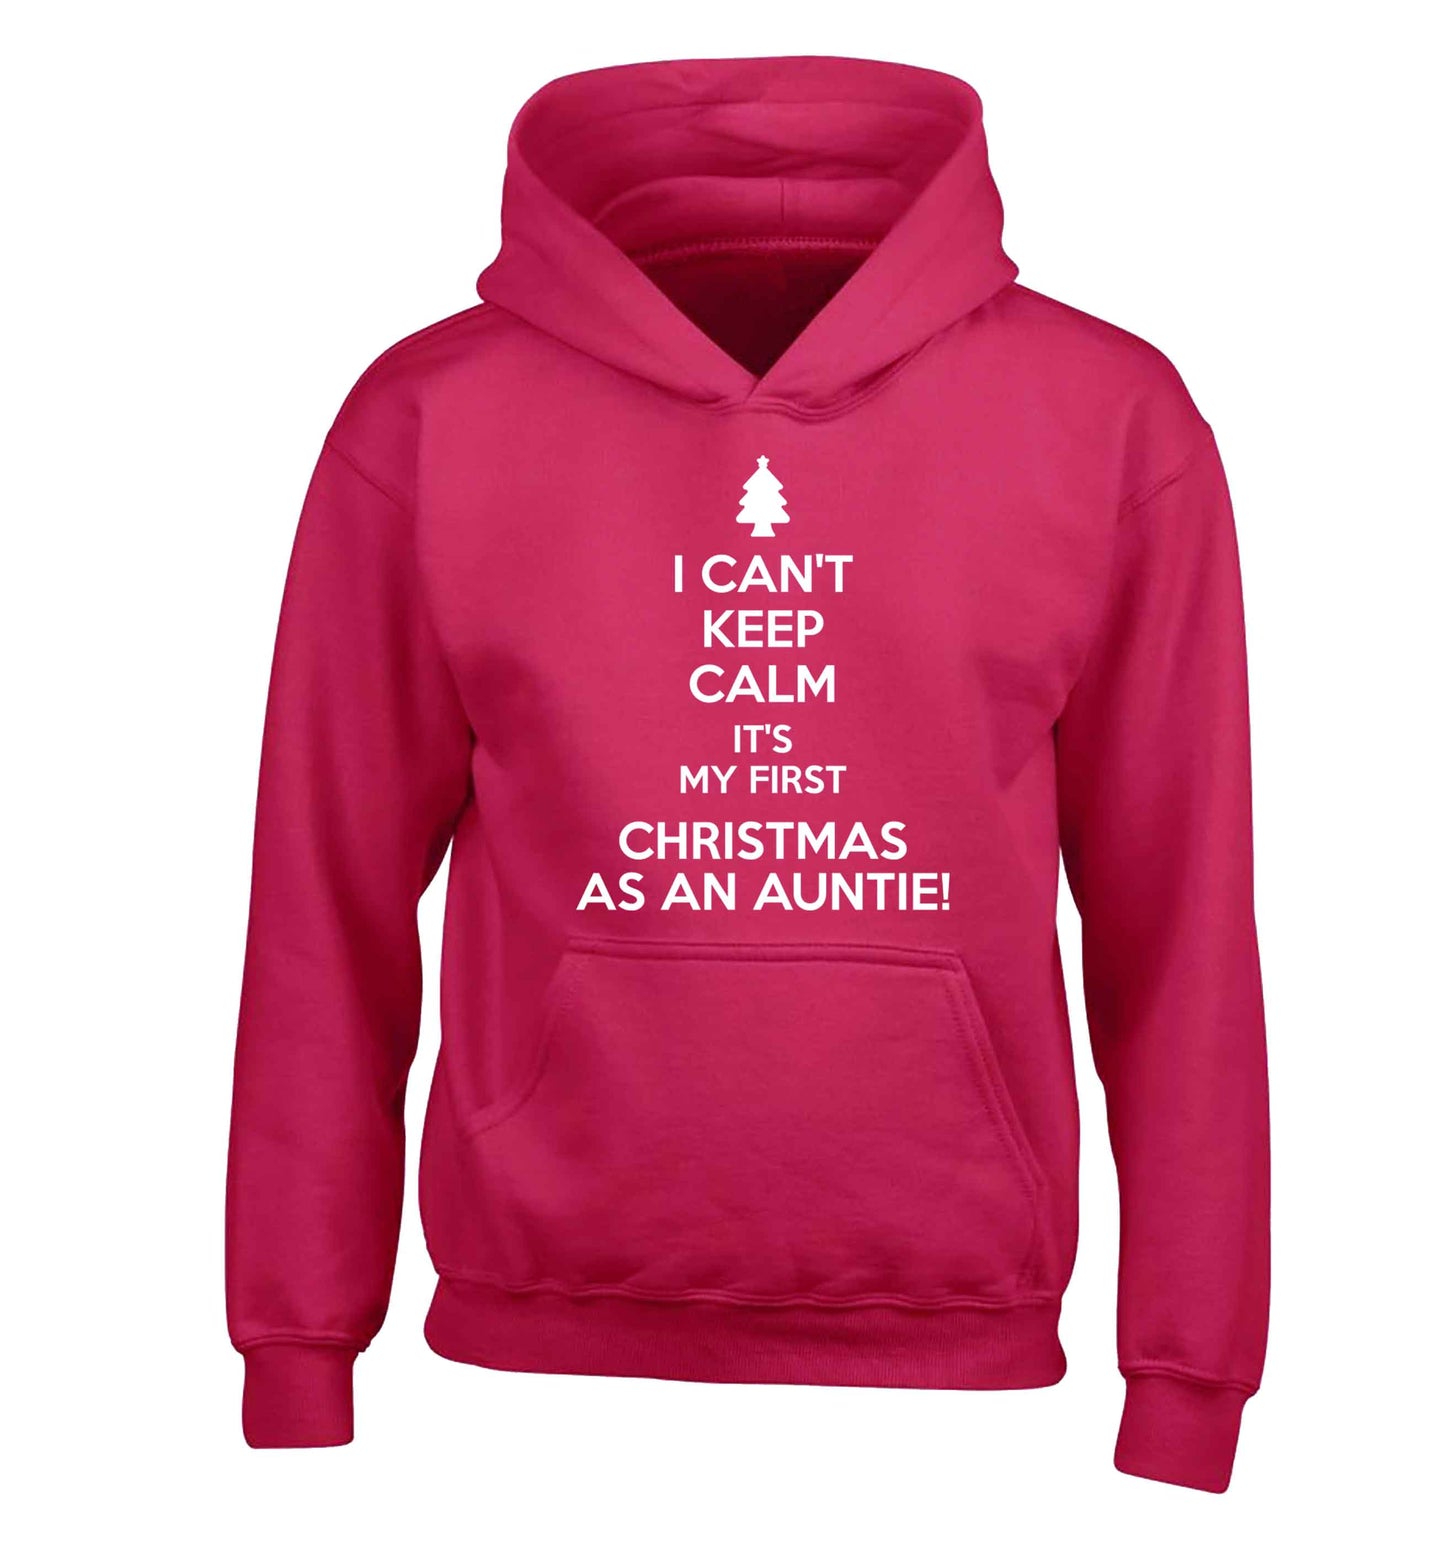 I can't keep calm it's my first Christmas as an auntie! children's pink hoodie 12-13 Years